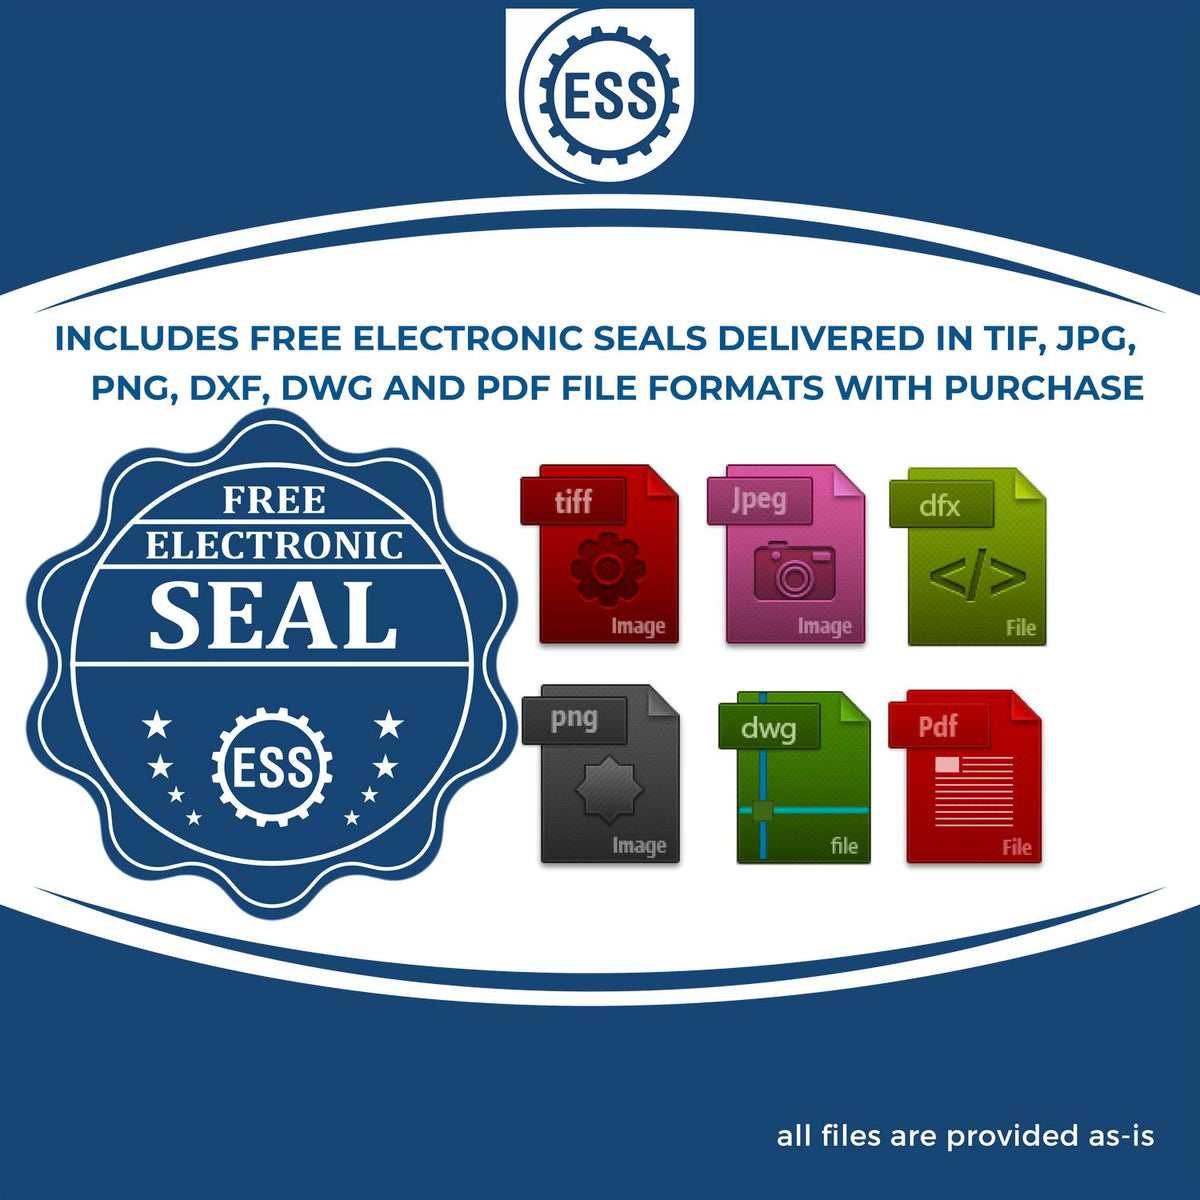 An infographic for the free electronic seal for the Heavy Duty Cast Iron Alabama Engineer Seal Embosser illustrating the different file type icons such as DXF, DWG, TIF, JPG and PNG.